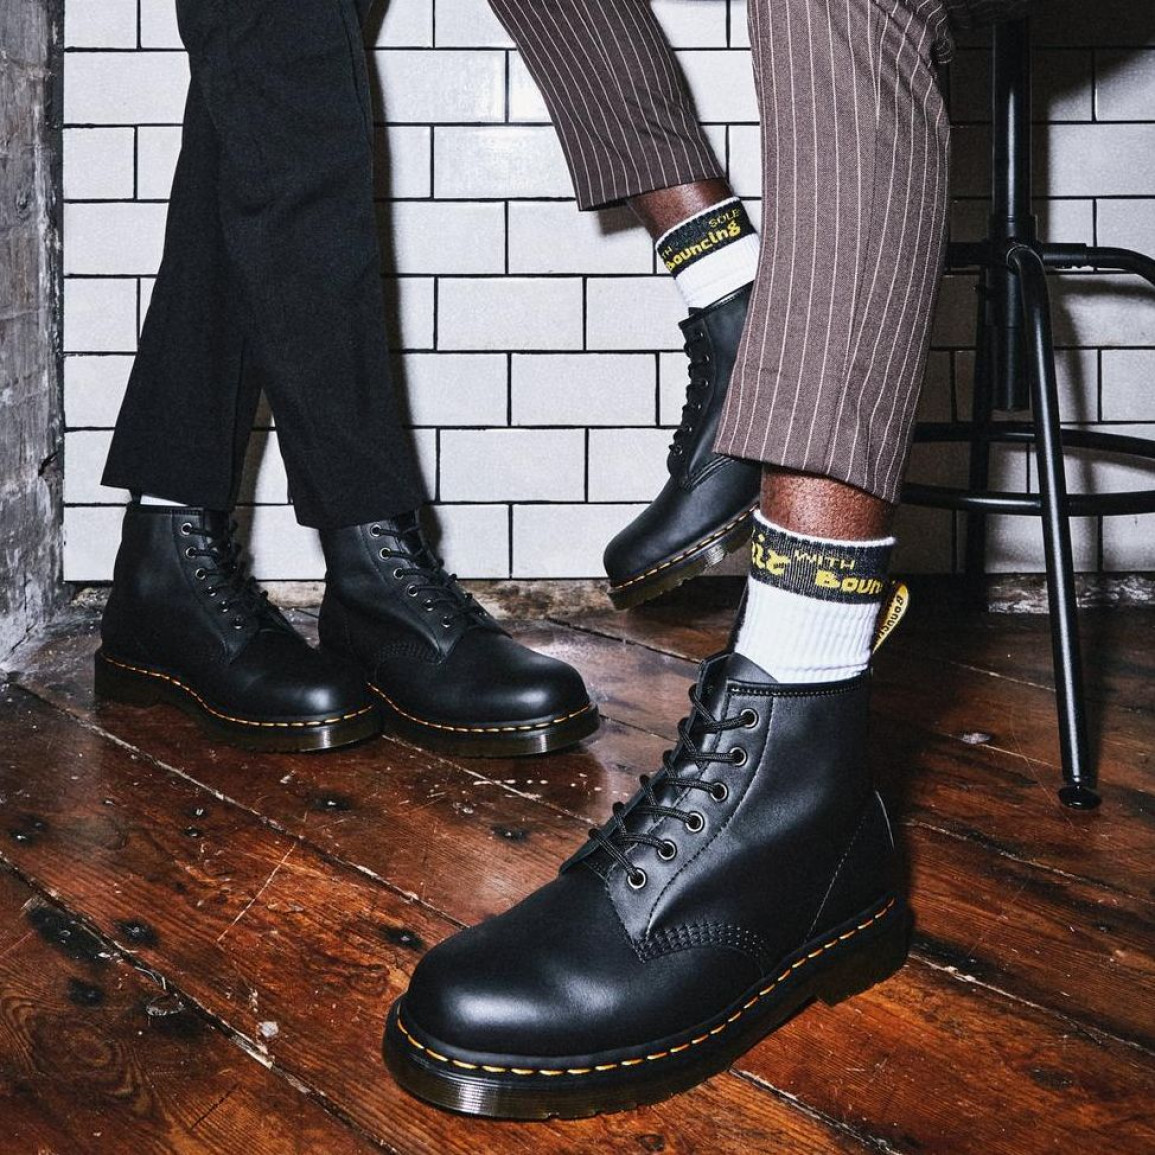 Dr.Martens◇レースアップブーツ/UK4/BLK/26409001-